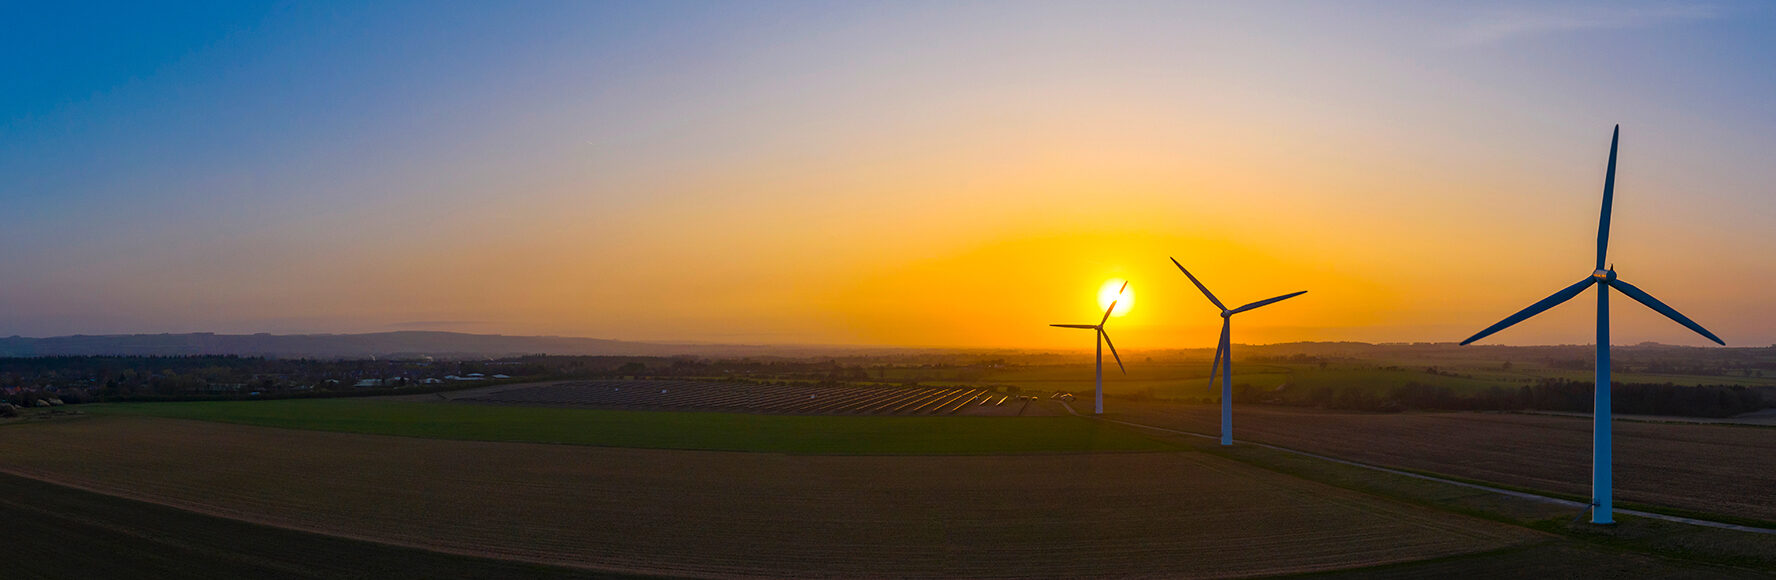 Modern windmills loom over a field of crops at sunset.